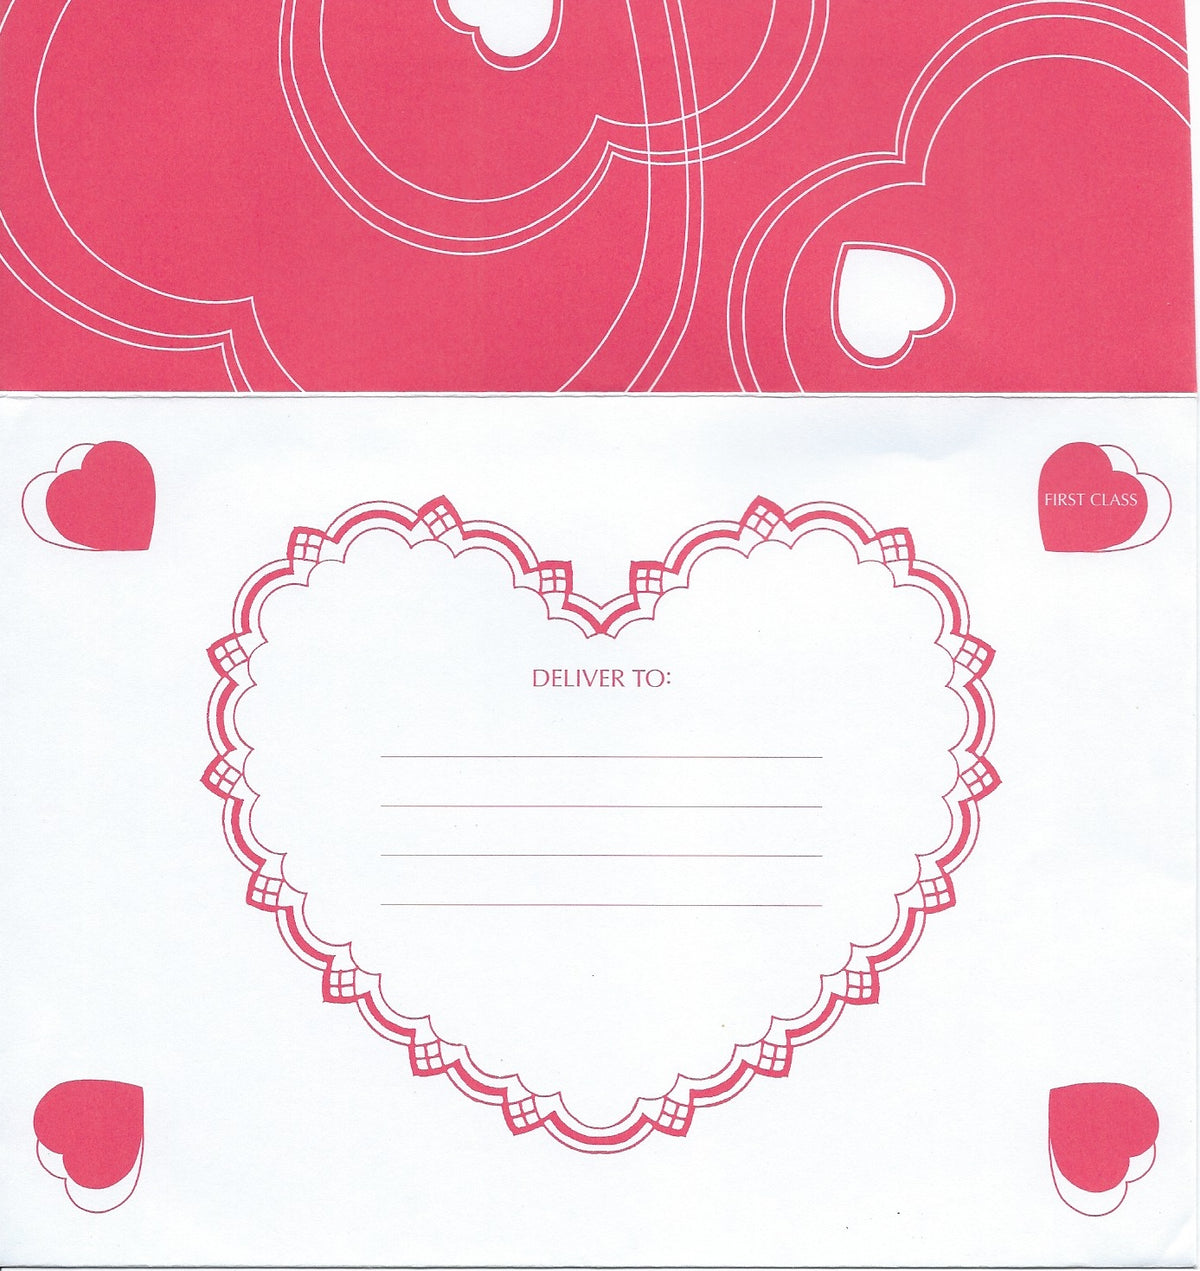 A Valentine's Day themed decorative envelope featuring a large white heart with "deliver to:" text and lines for addressing, surrounded by smaller hearts on a red background with swirls and curls is the Valentine's Day Greeting Card - To My Valentine from Greeting Cards brand.